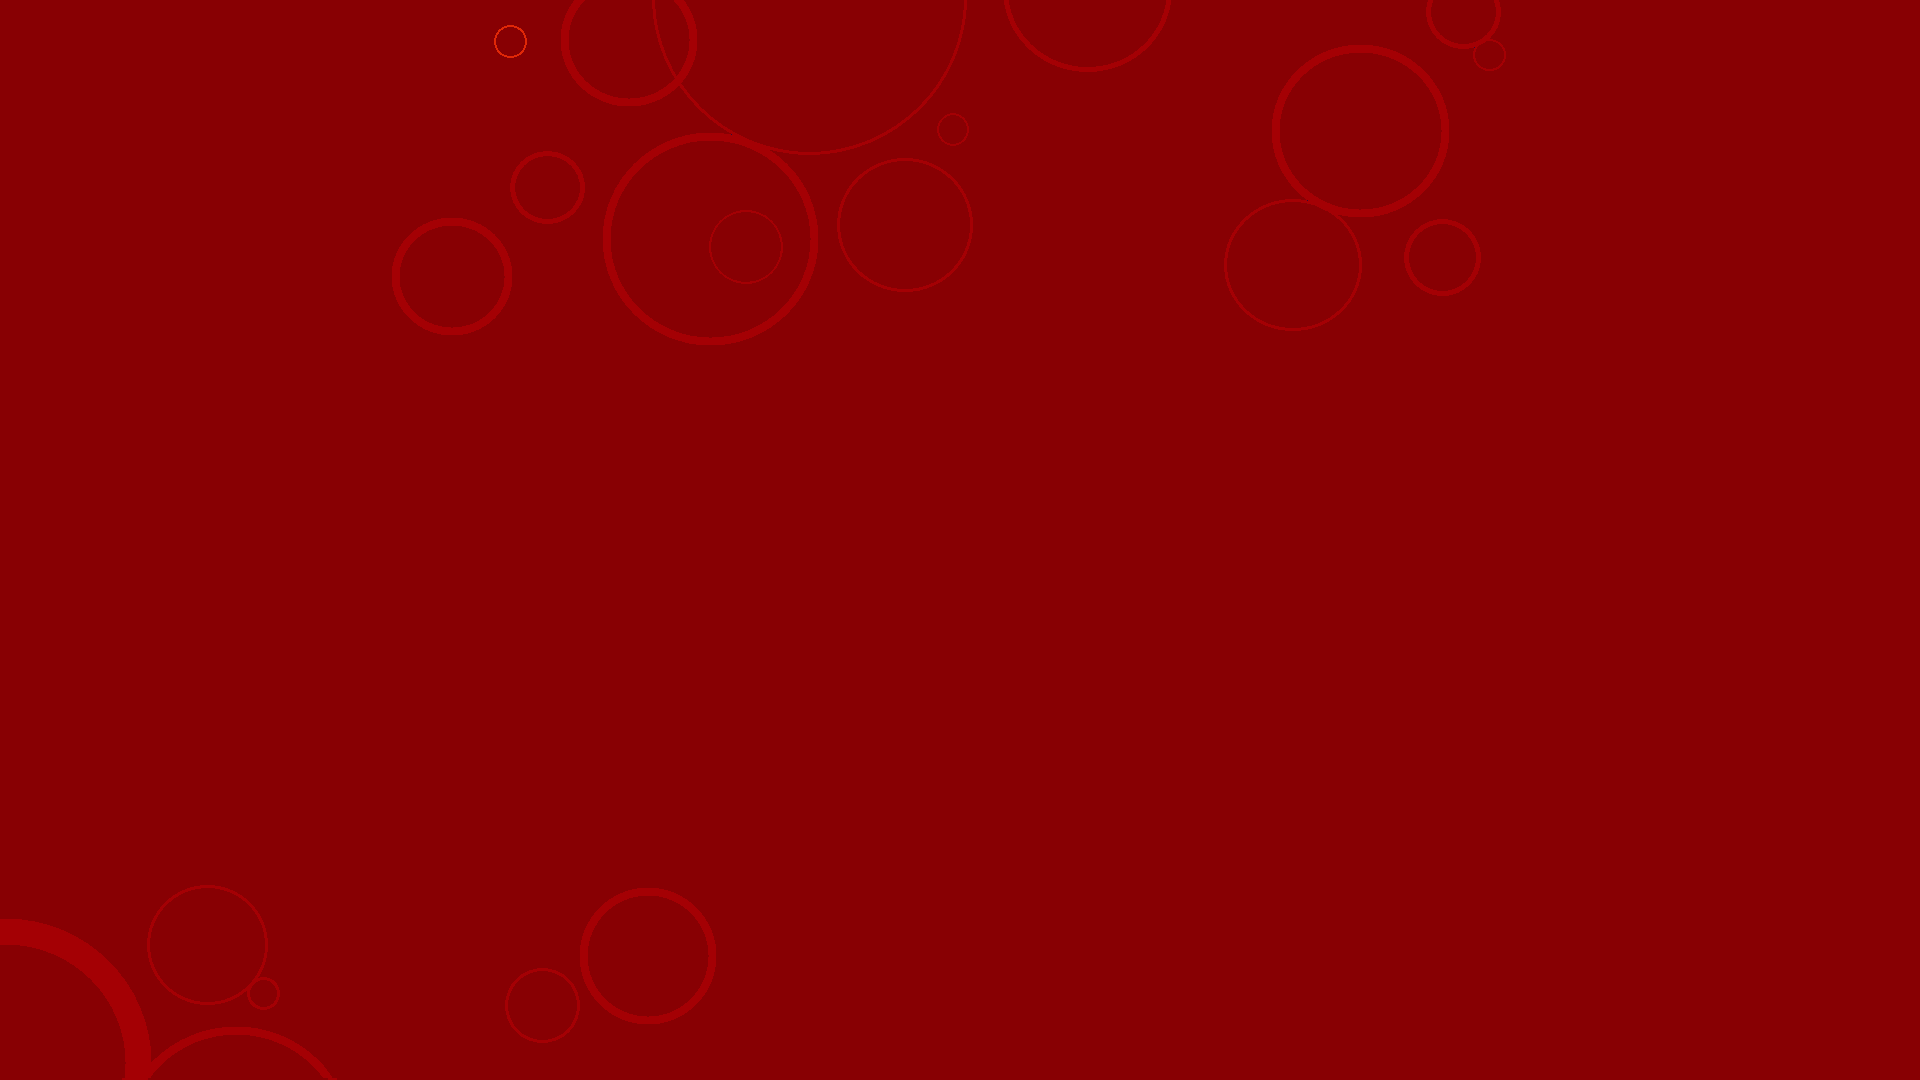 Dark Red Windows Bubbles Background By Gifteddeviant